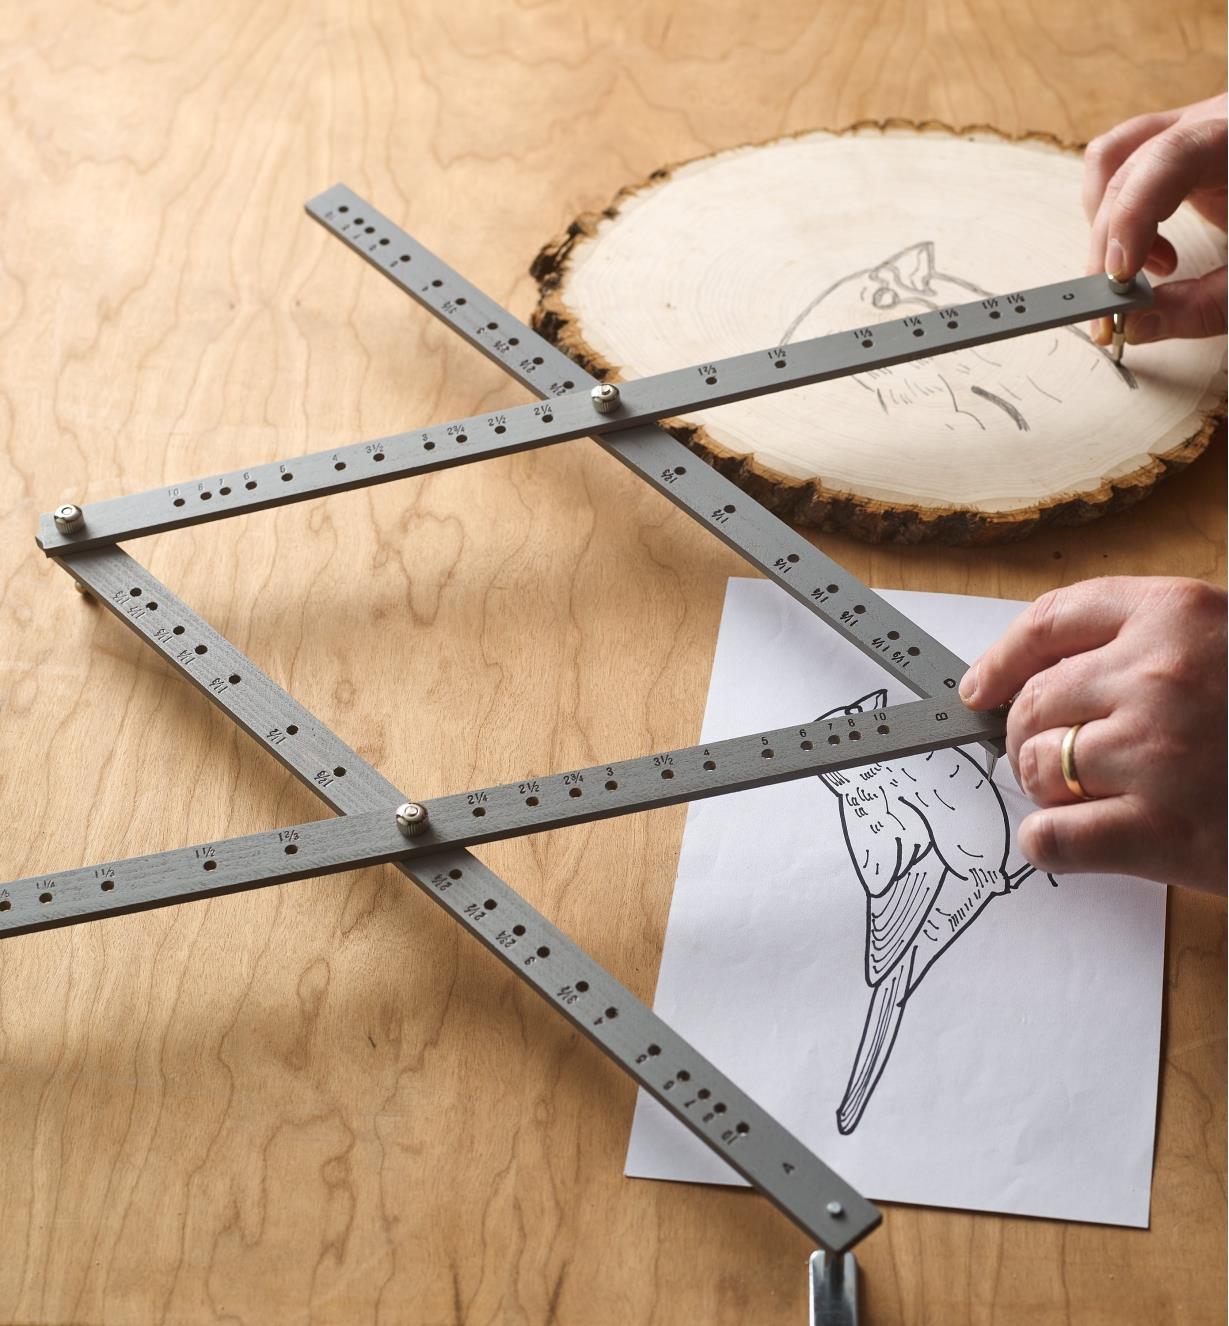 Using a pantograph to transfer a drawing of a bird from paper to a piece of wood